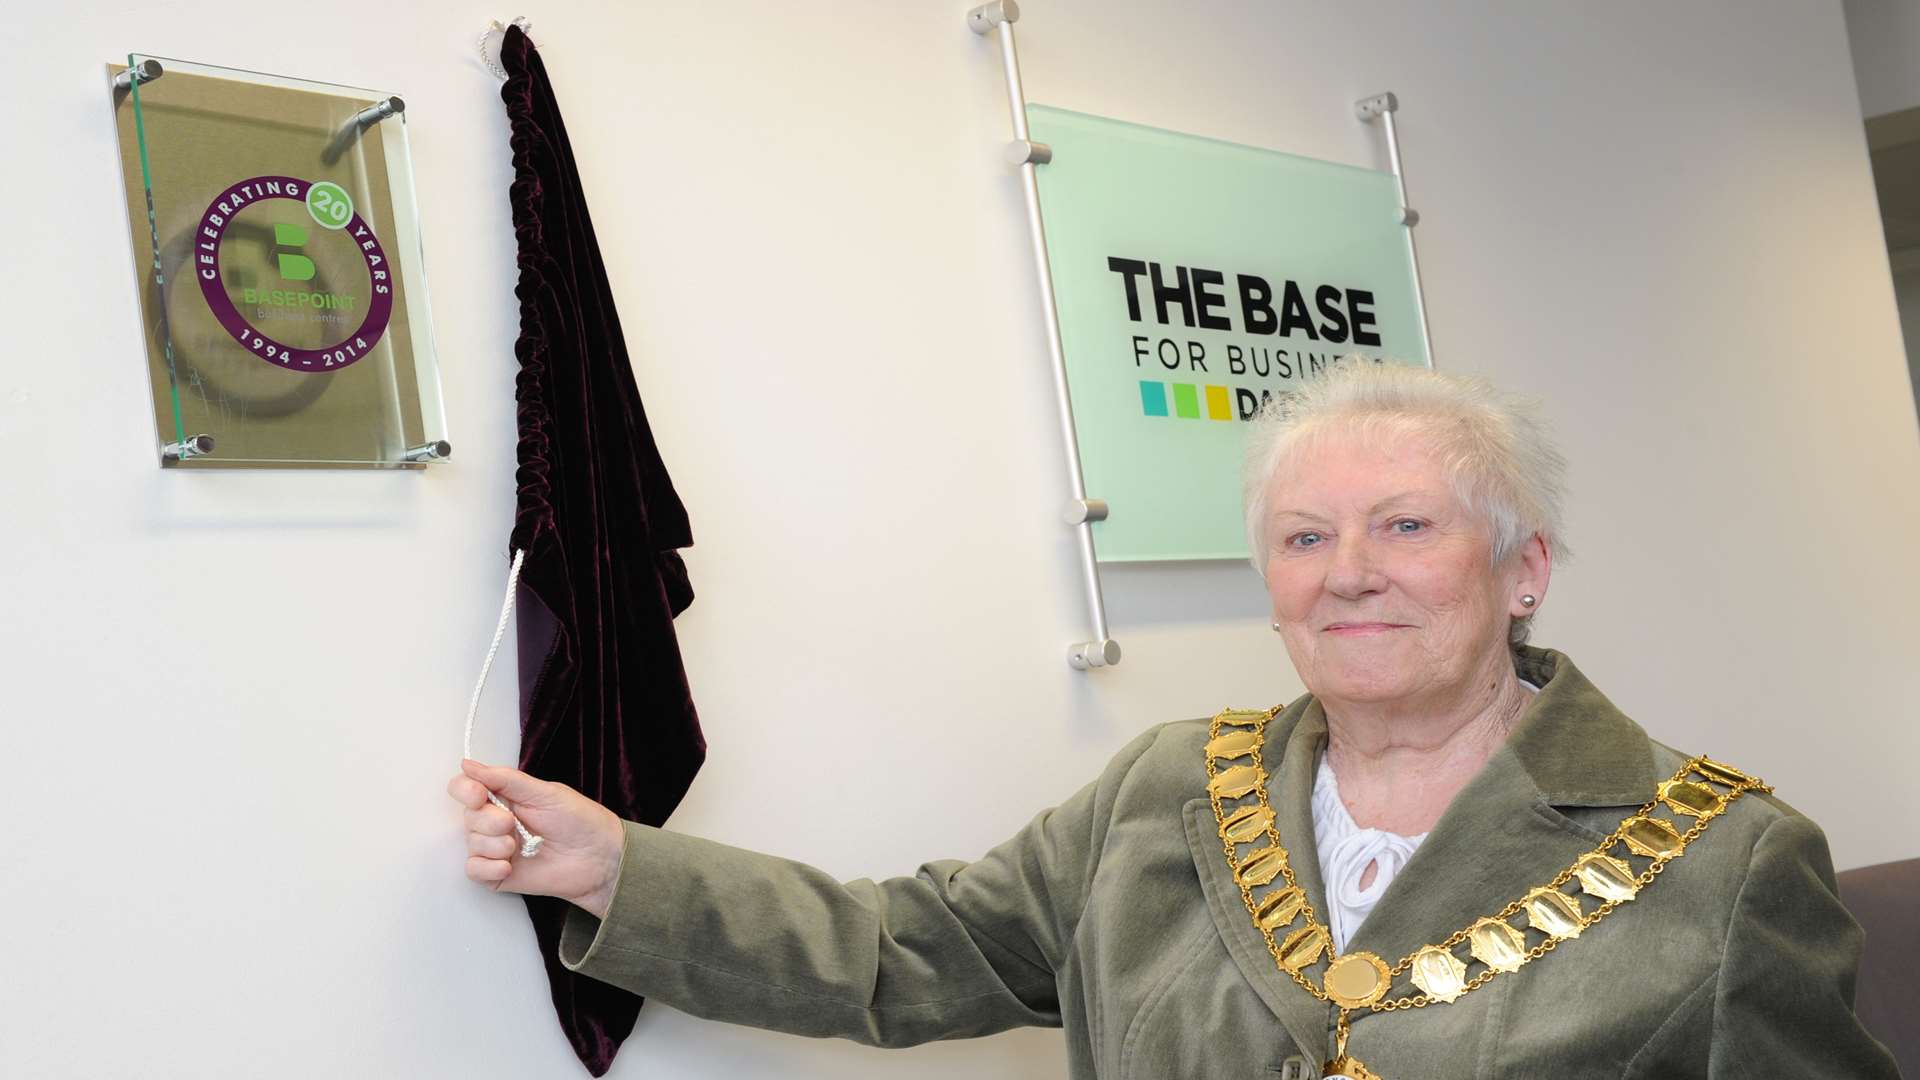 Mayor of Dartford Patsy Thurlow unveils a plaque at the Base celerbating the 20th anniversary of site managers Basepoint, who have just bought the building